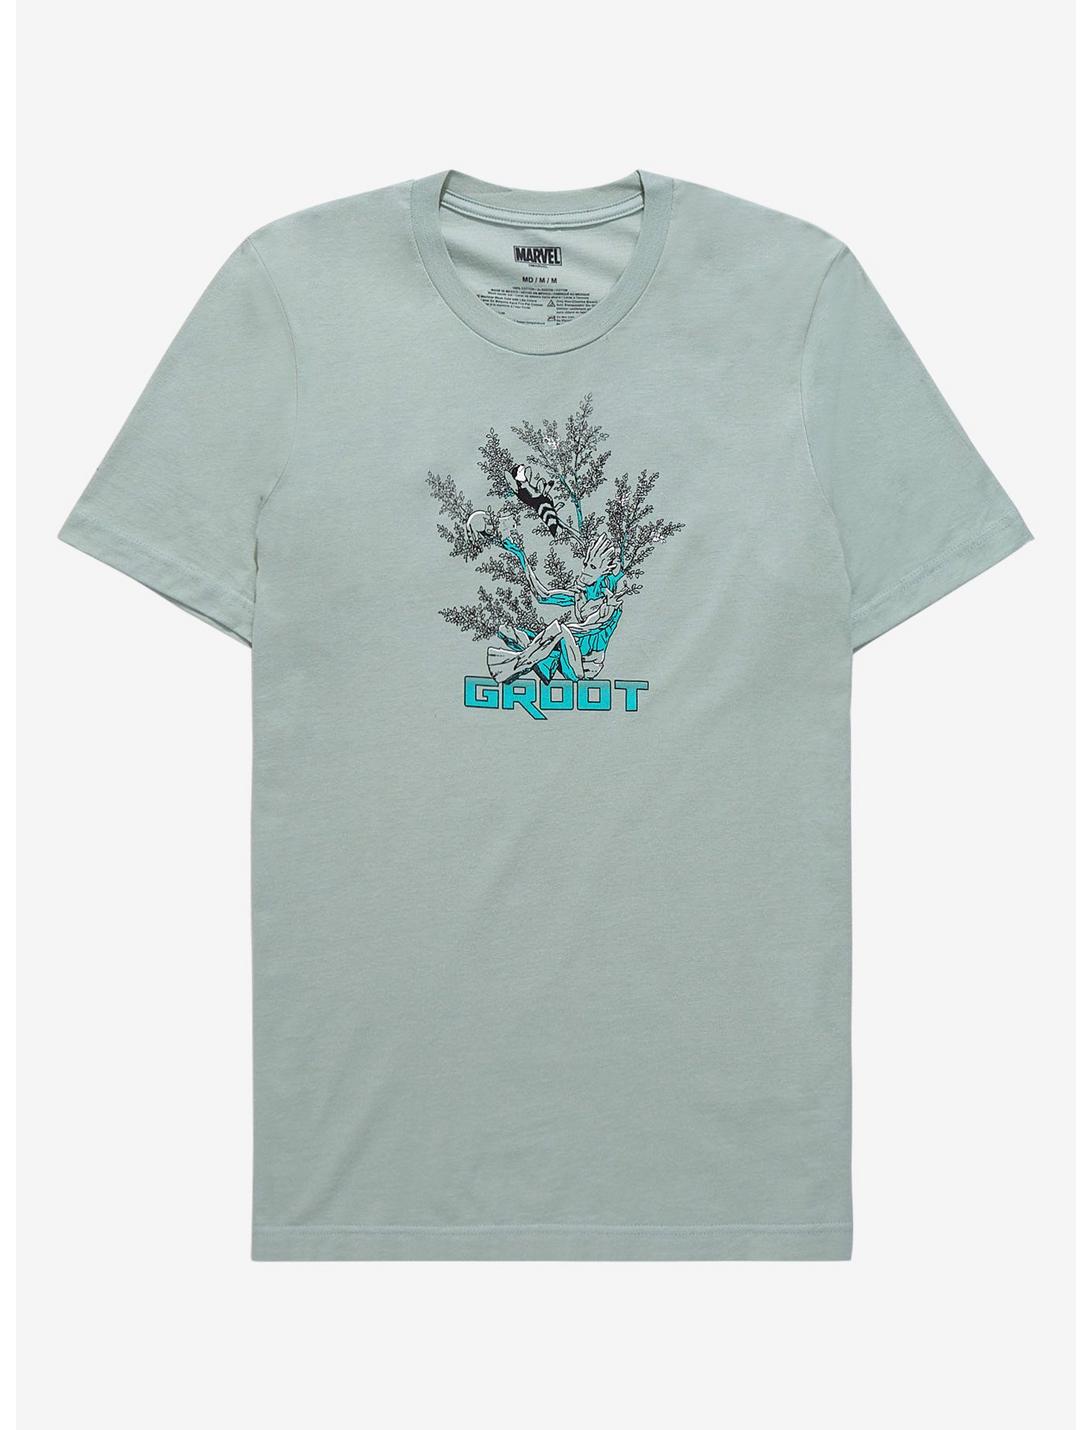 Marvel Guardians of the Galaxy Groot Comic Story Tonal T-Shirt - BoxLunch Exclusive, SAGE, hi-res